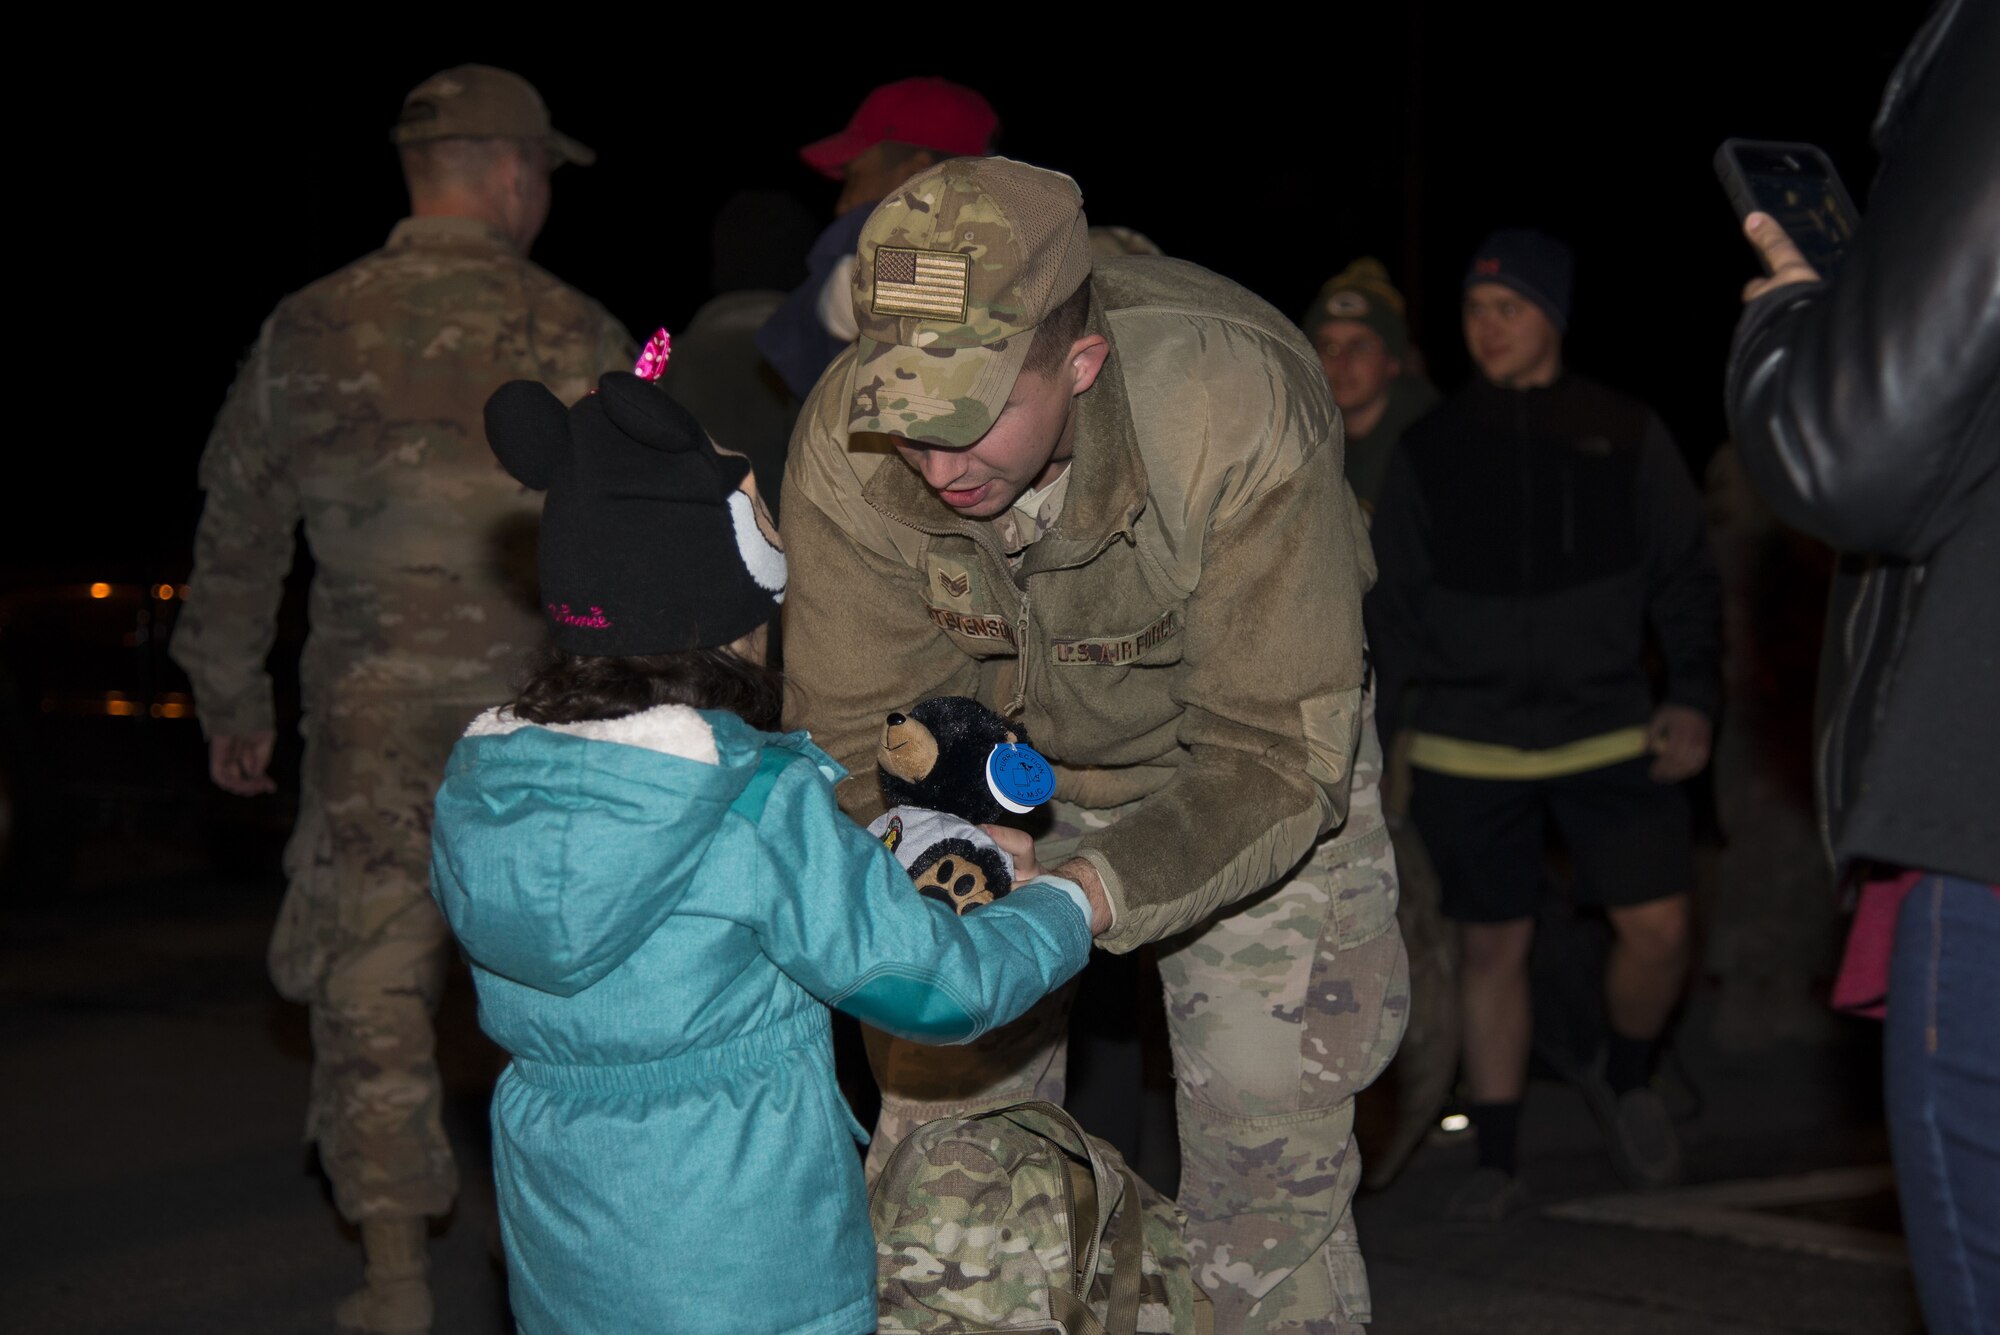 Staff Sgt. Justin Stevenson, 436th Security Forces Squadron defender, hands a stuffed animal to his daughter, Julia, Jan. 21, 2018, at Dover Air Force Base, Del. Stevenson and 11 of his wingmen returned early that morning from a six-month deployment to the Middle East. (U.S. Air Force Photo by Staff Sgt. Aaron J. Jenne)